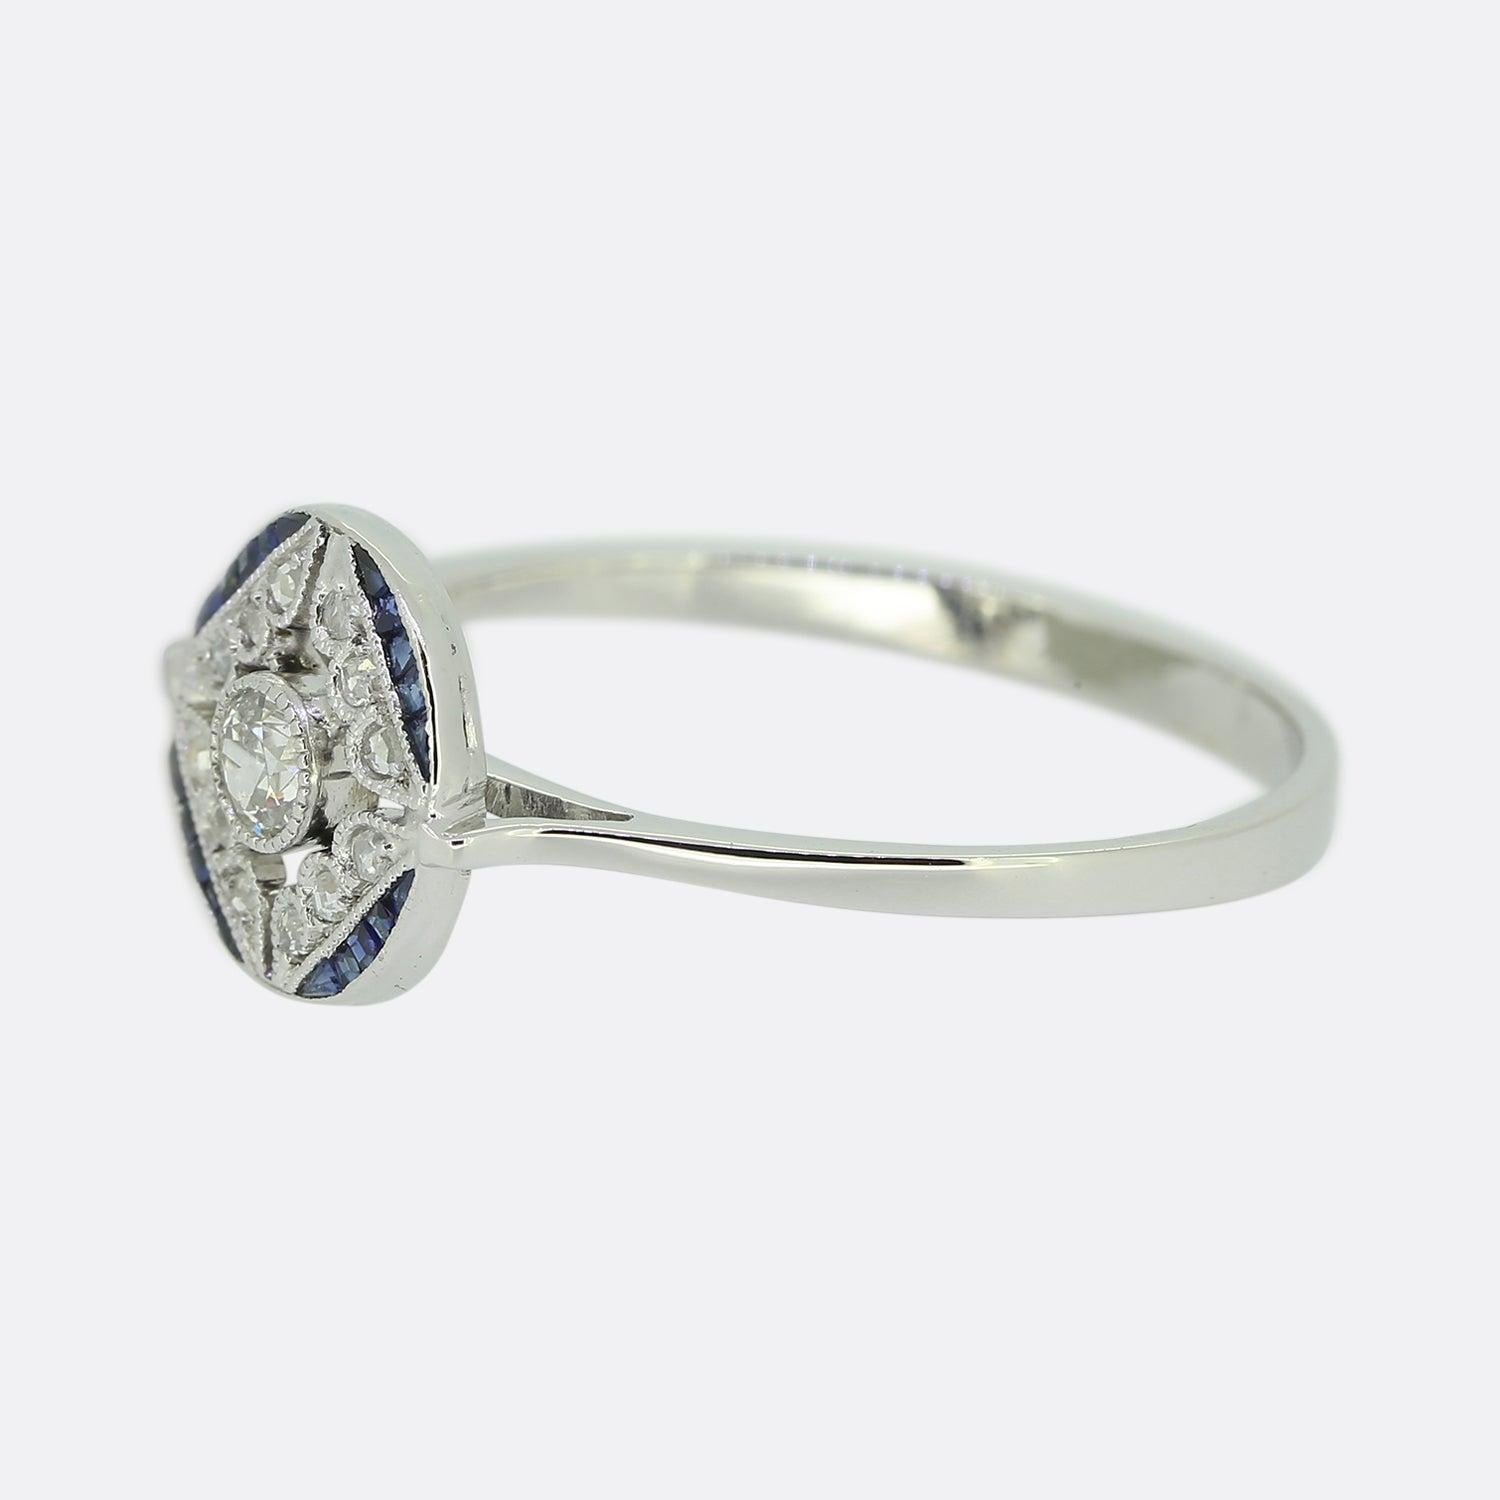 Here we have a wonderful sapphire and diamond ring crafted at a time when the Art Deco style was at the height of design. A single round brilliant cut diamond sits slightly risen at the centre of an open face in a fine milgrain setting. This